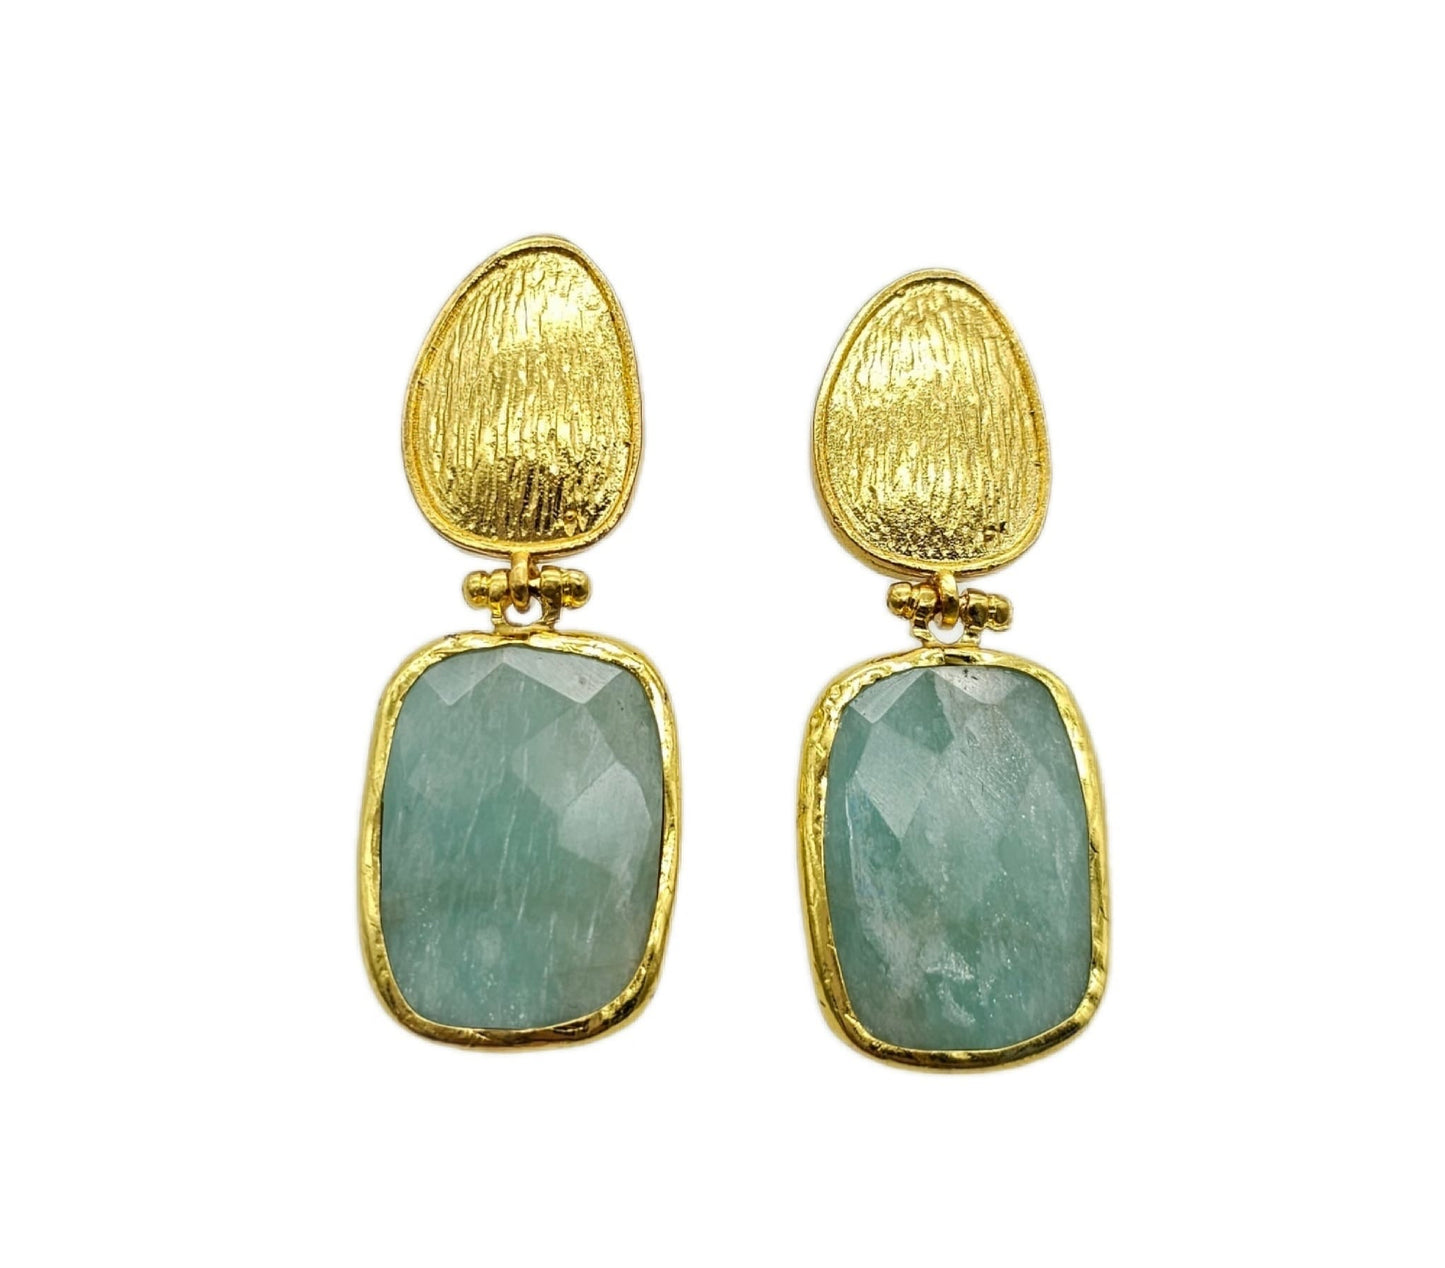 21k gold plated bold, contemporary etched gold discs attach via flexible connectors to stunning faceted rectangle amazonite